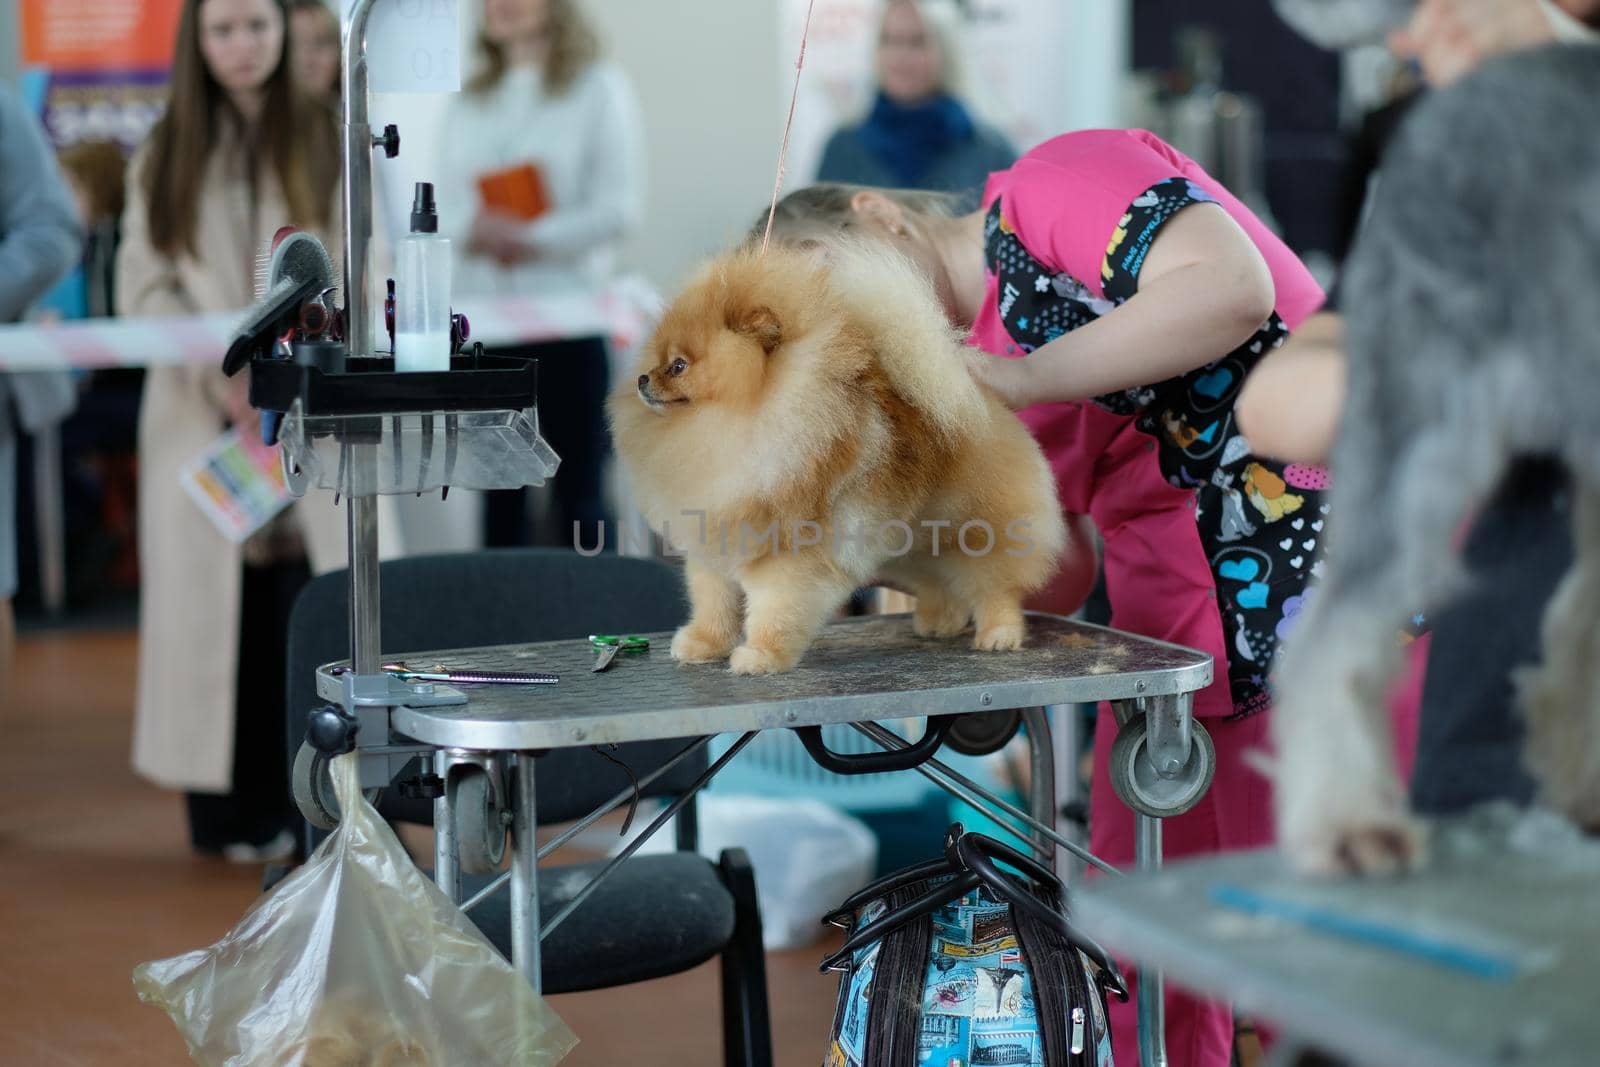 The process of caring for a pomeranian on dog grooming.